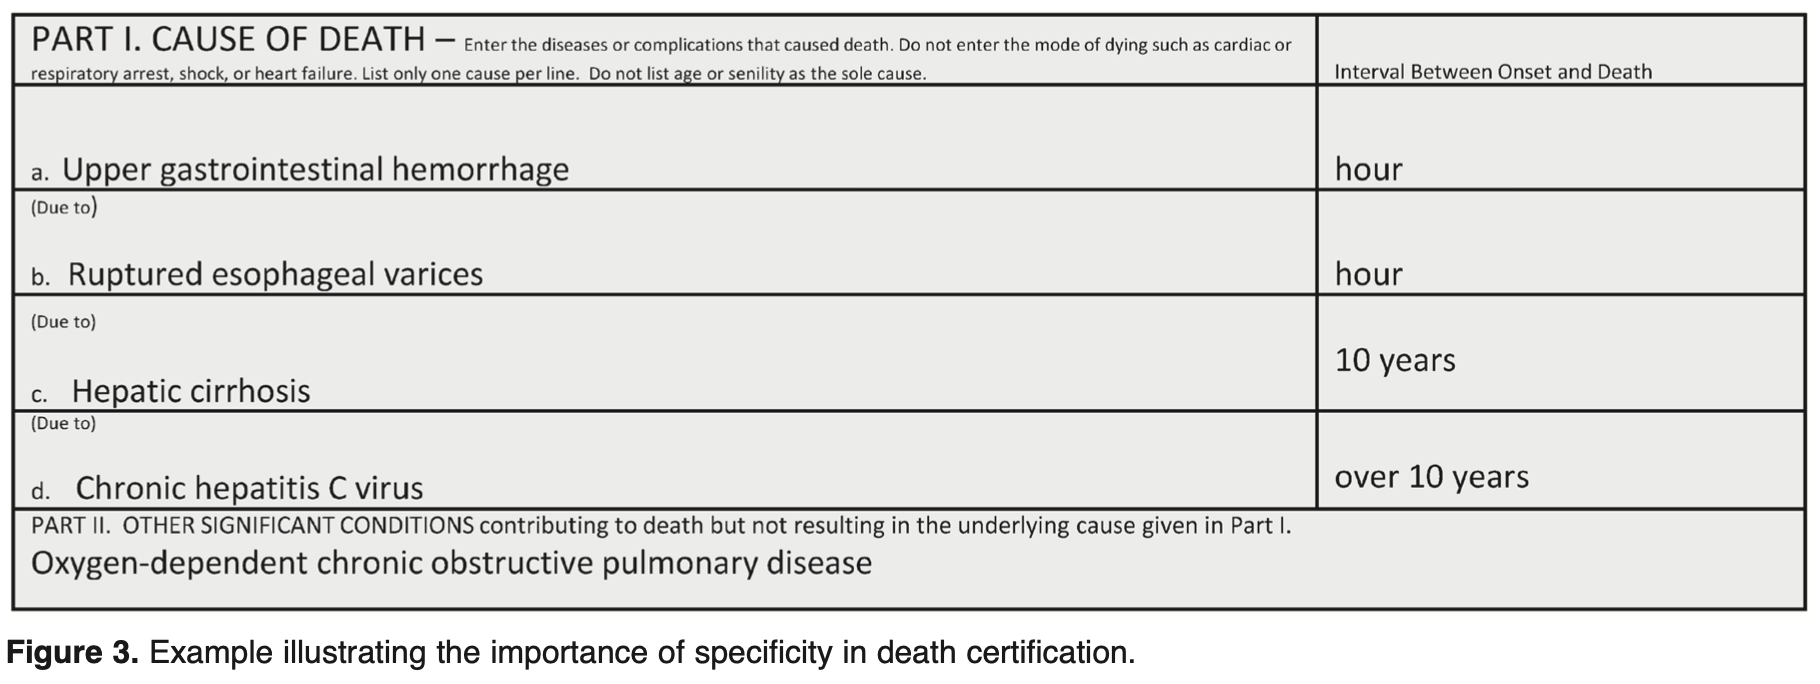 Figure 3. Example illustrating the importance of specificity in death certification.